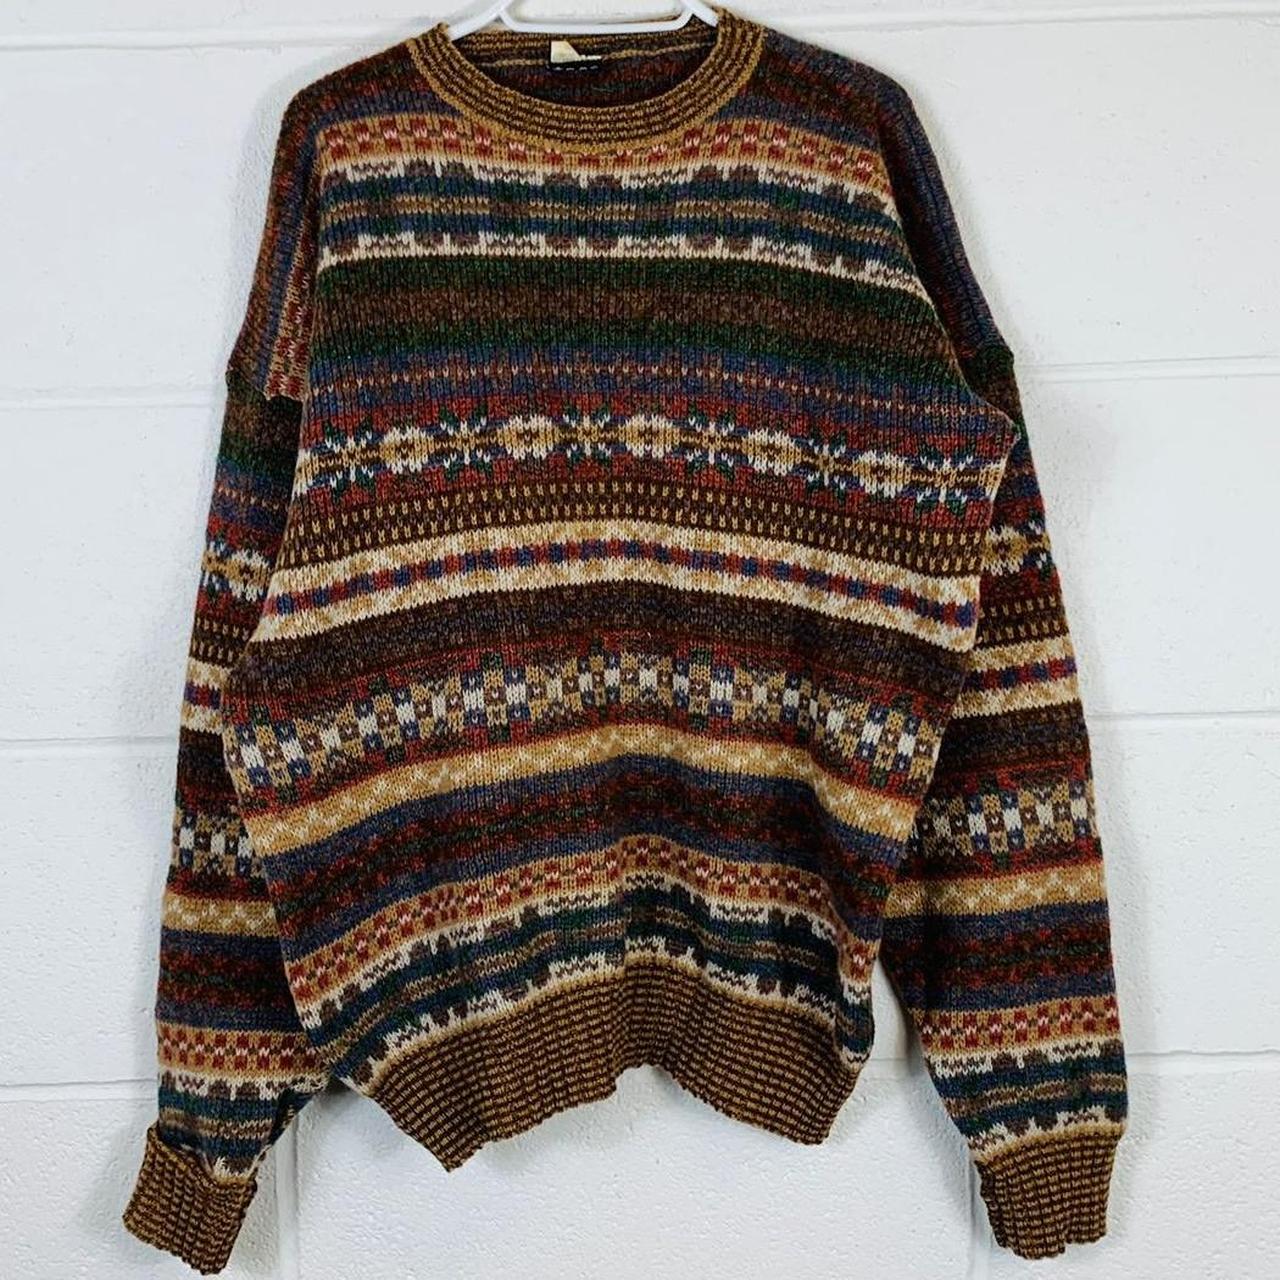 Product Image 2 - Vintage abstract knitted jumper

Brown and